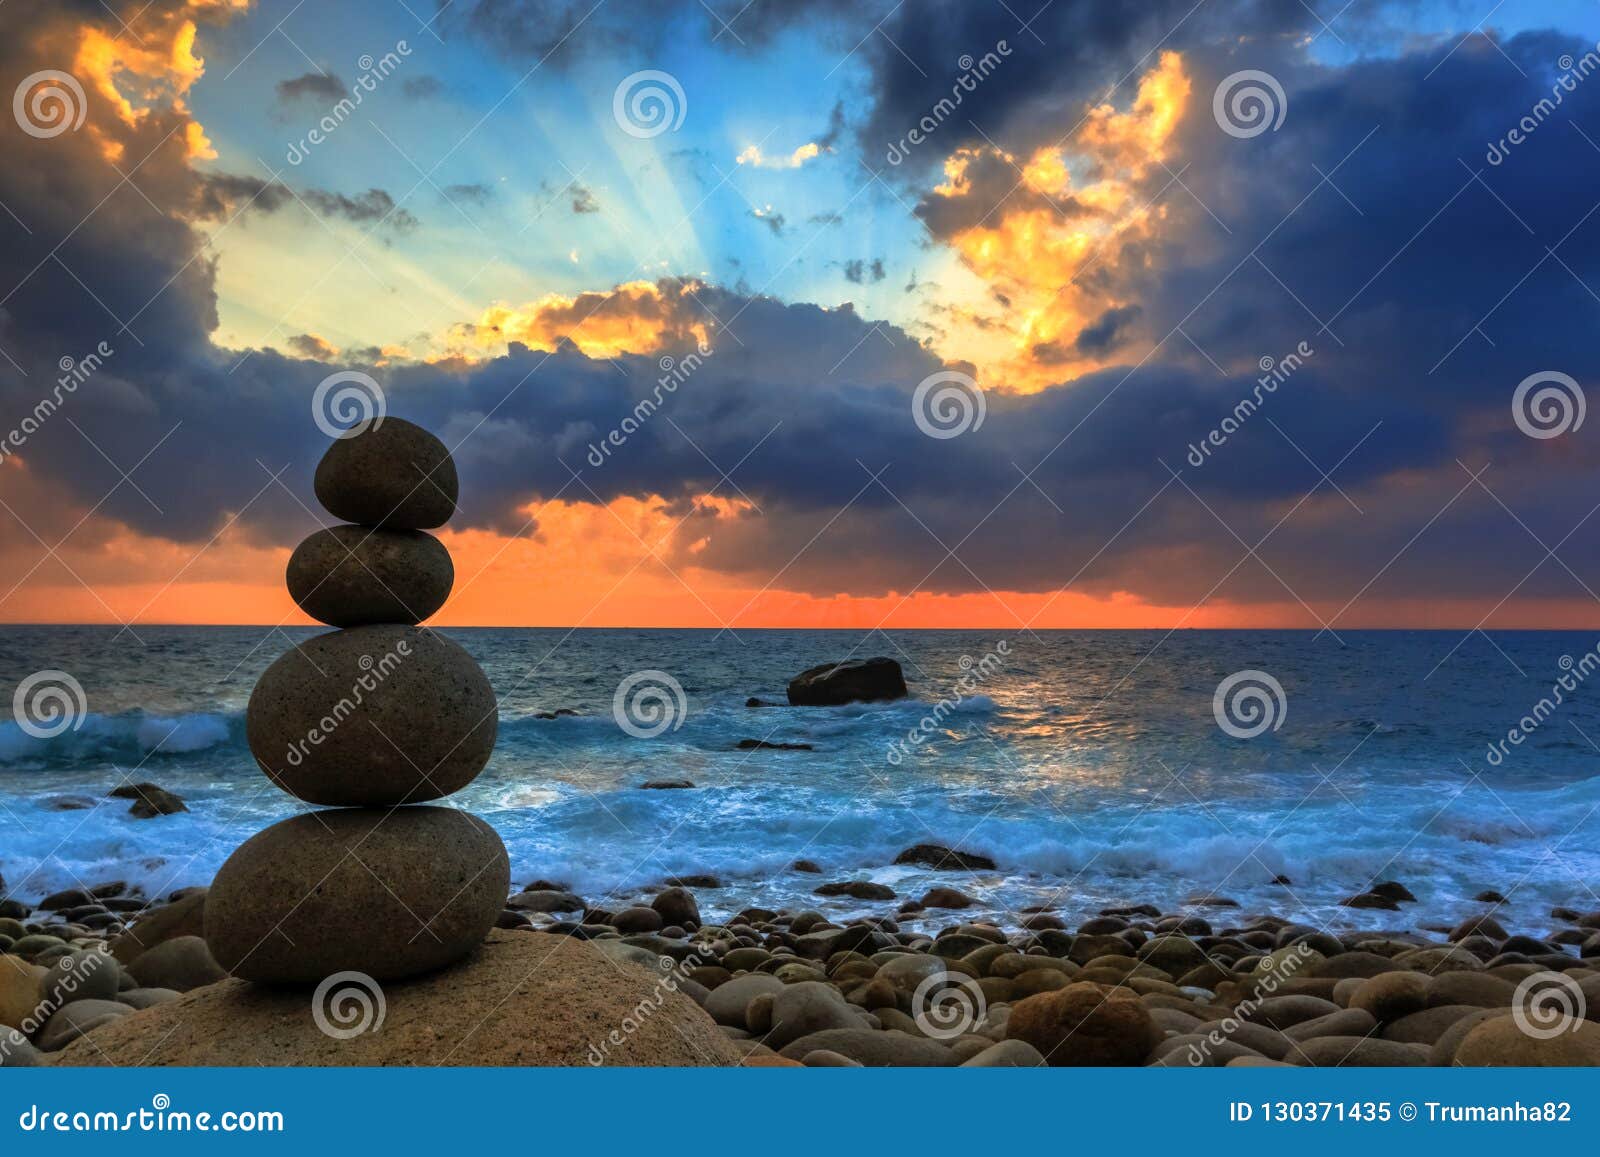 nature seascape with zen stacked rocks on beach at colorful sunrise